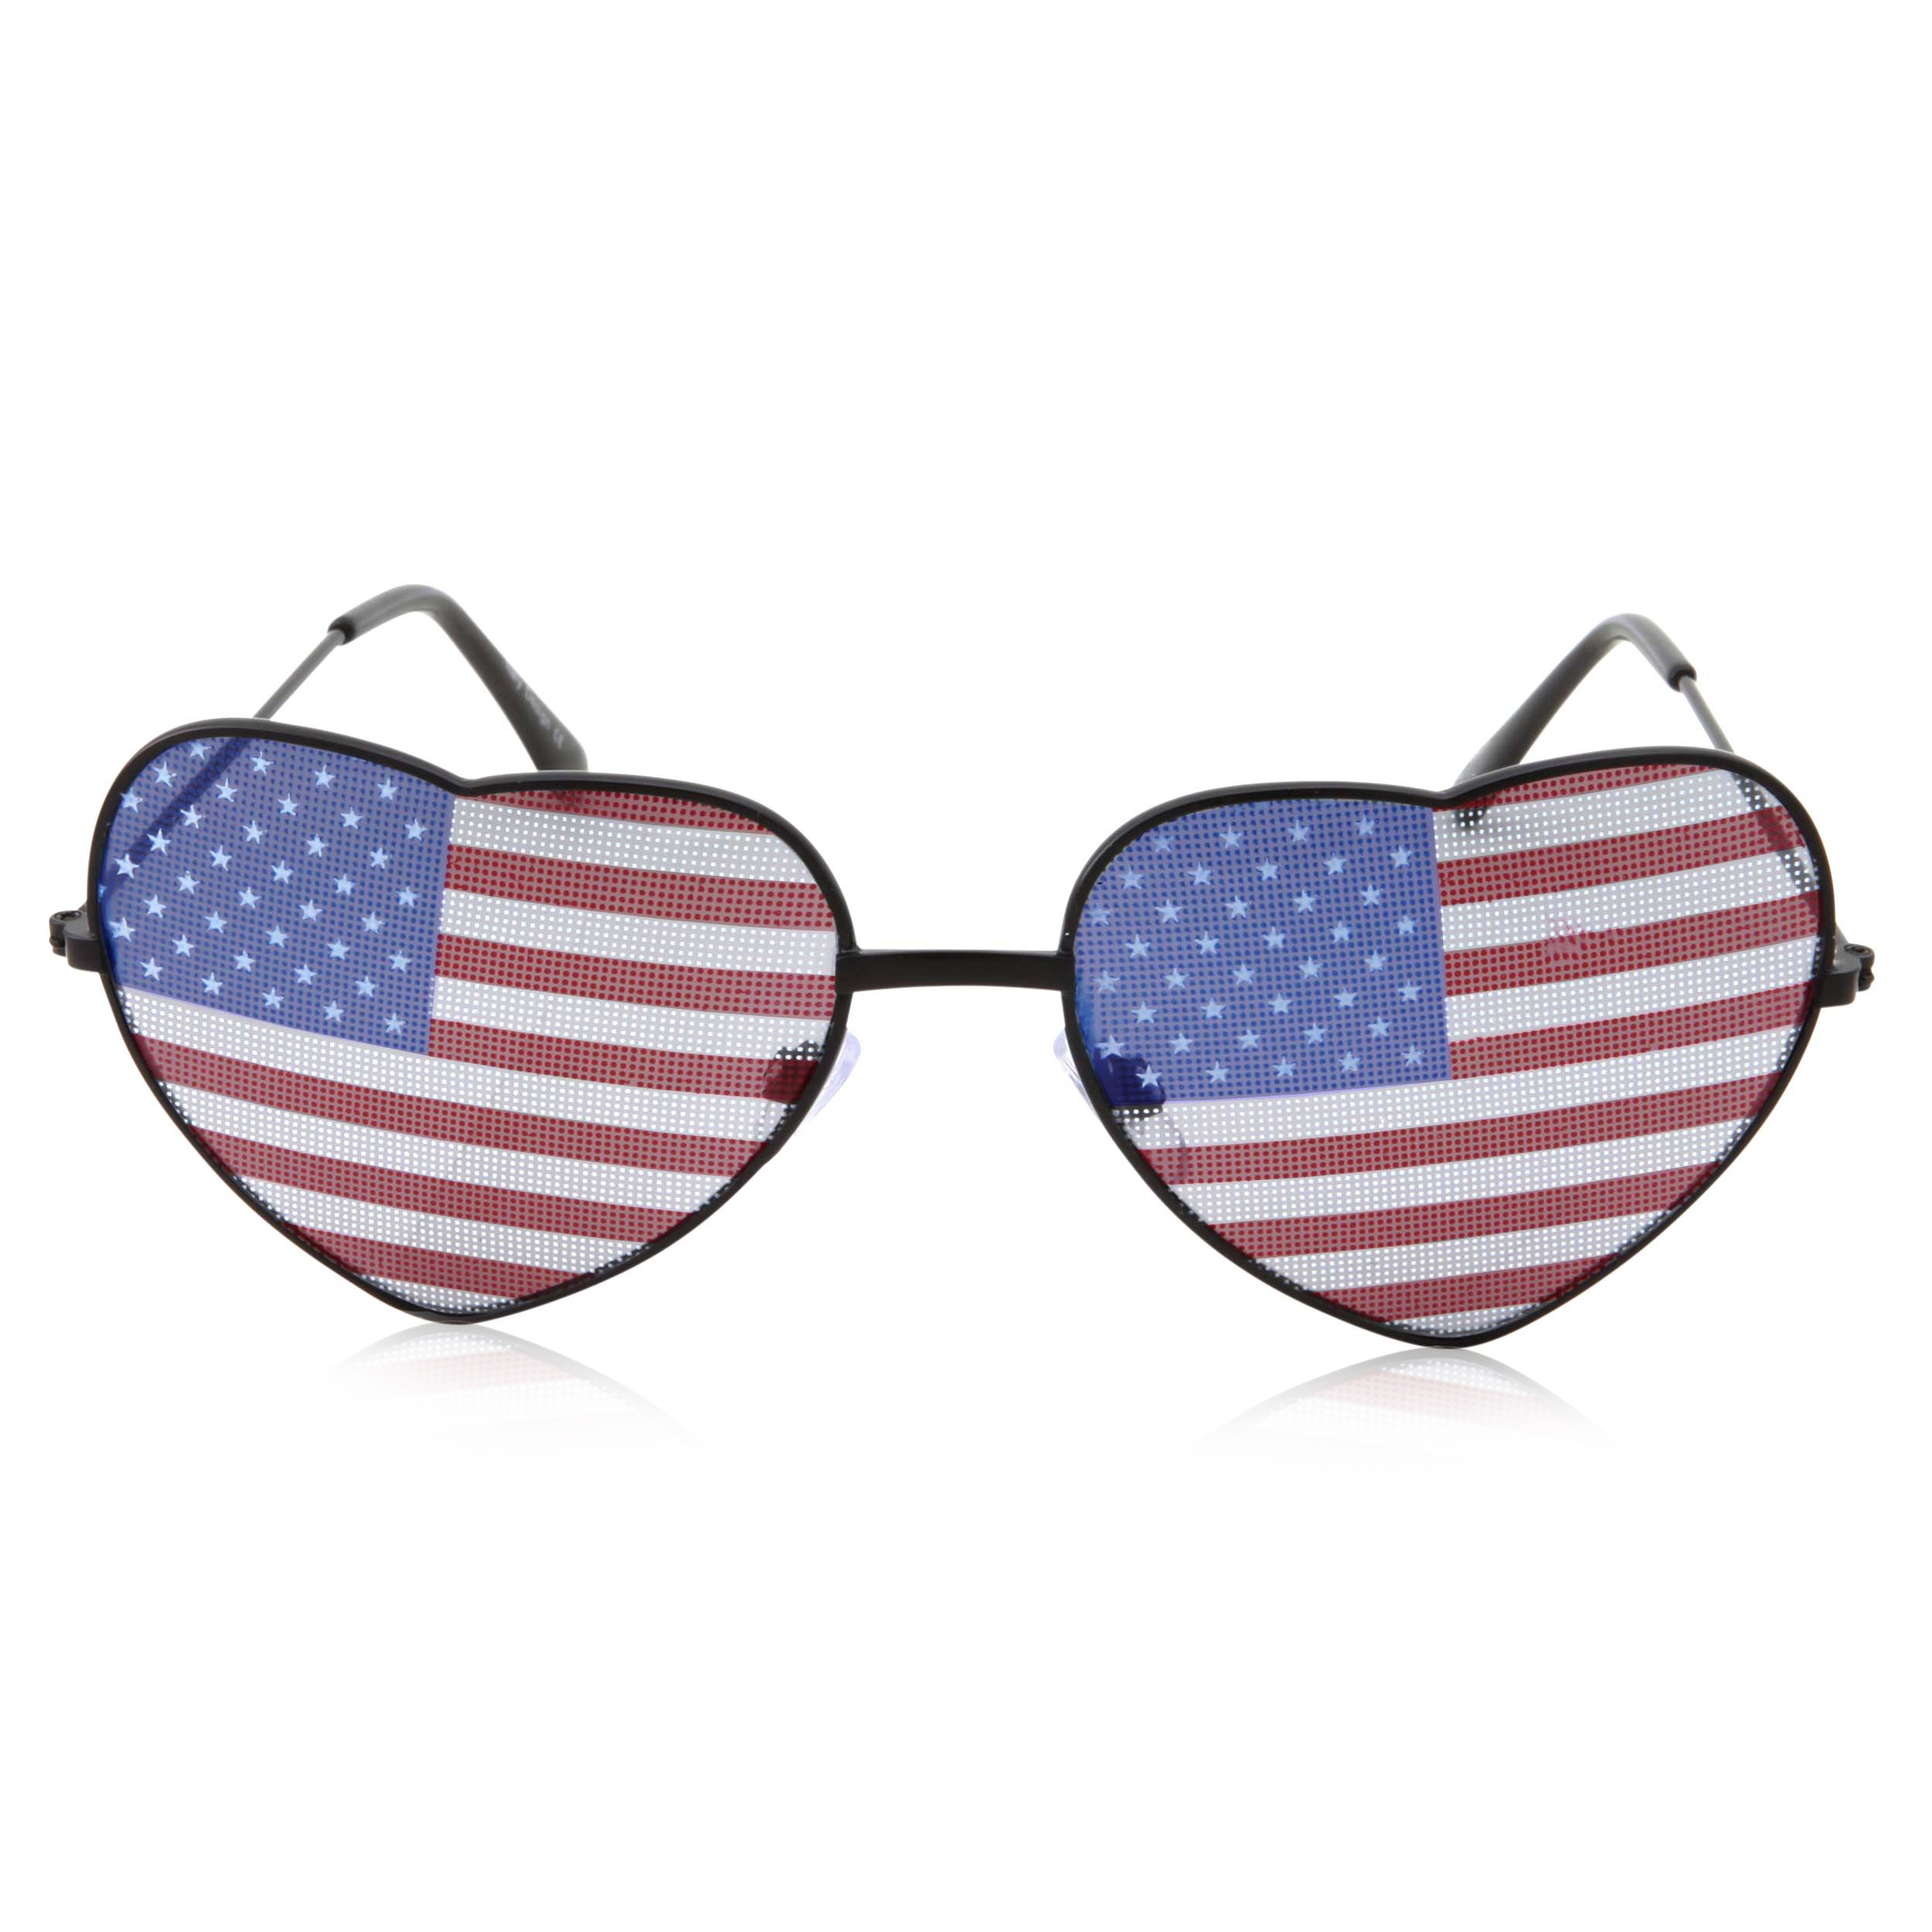 grinderPUNCH Women's Heart Shaped American Flag Cute Sunglasses US Shades - image 3 of 5